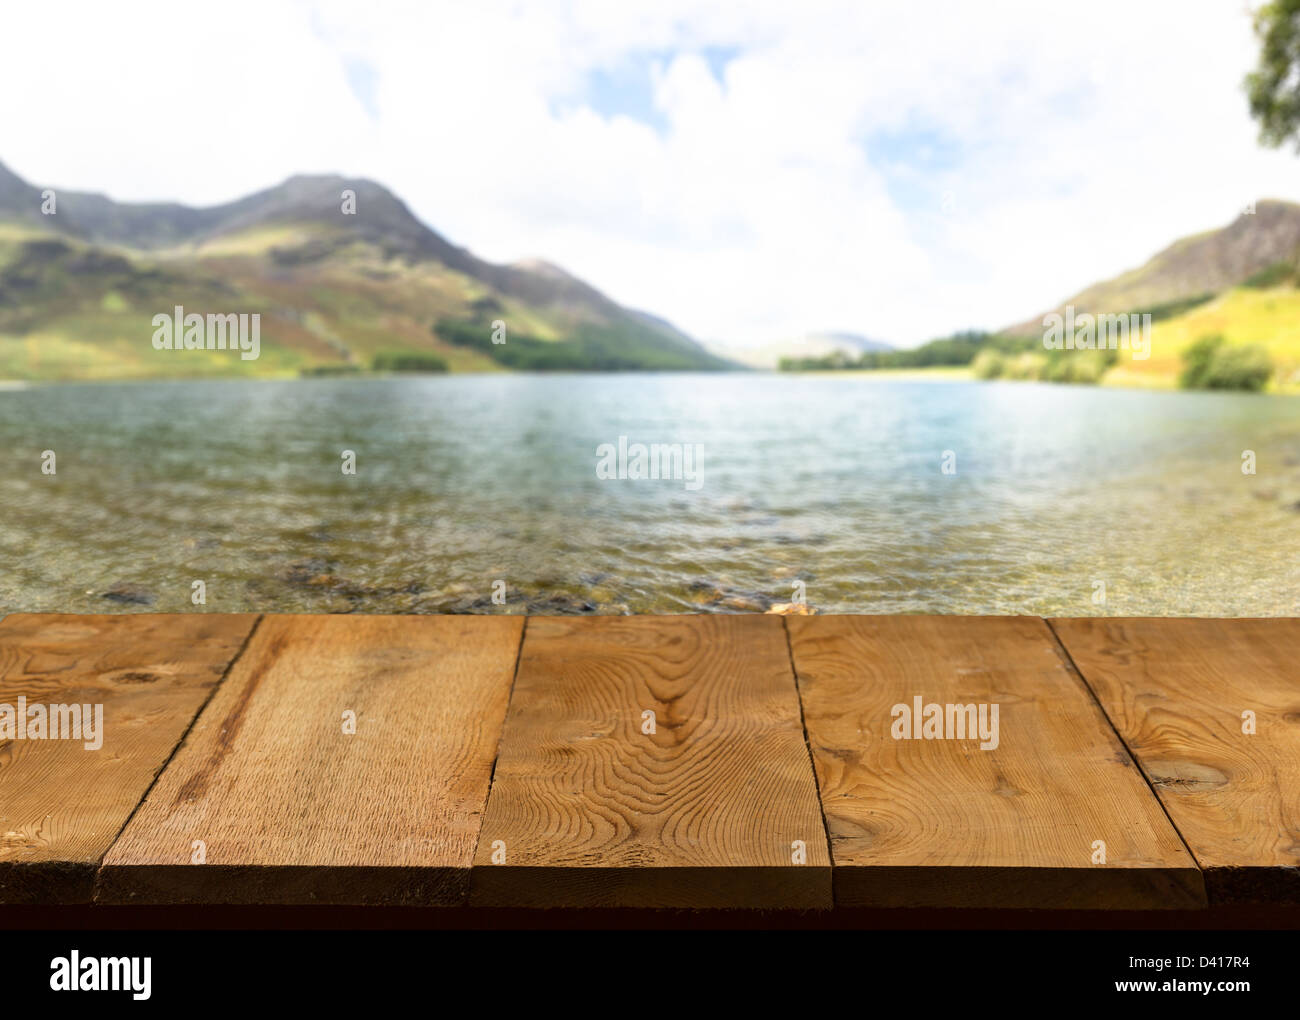 Wood pier or walkway or an old wooden table with blurred image of lake district in England as background Stock Photo